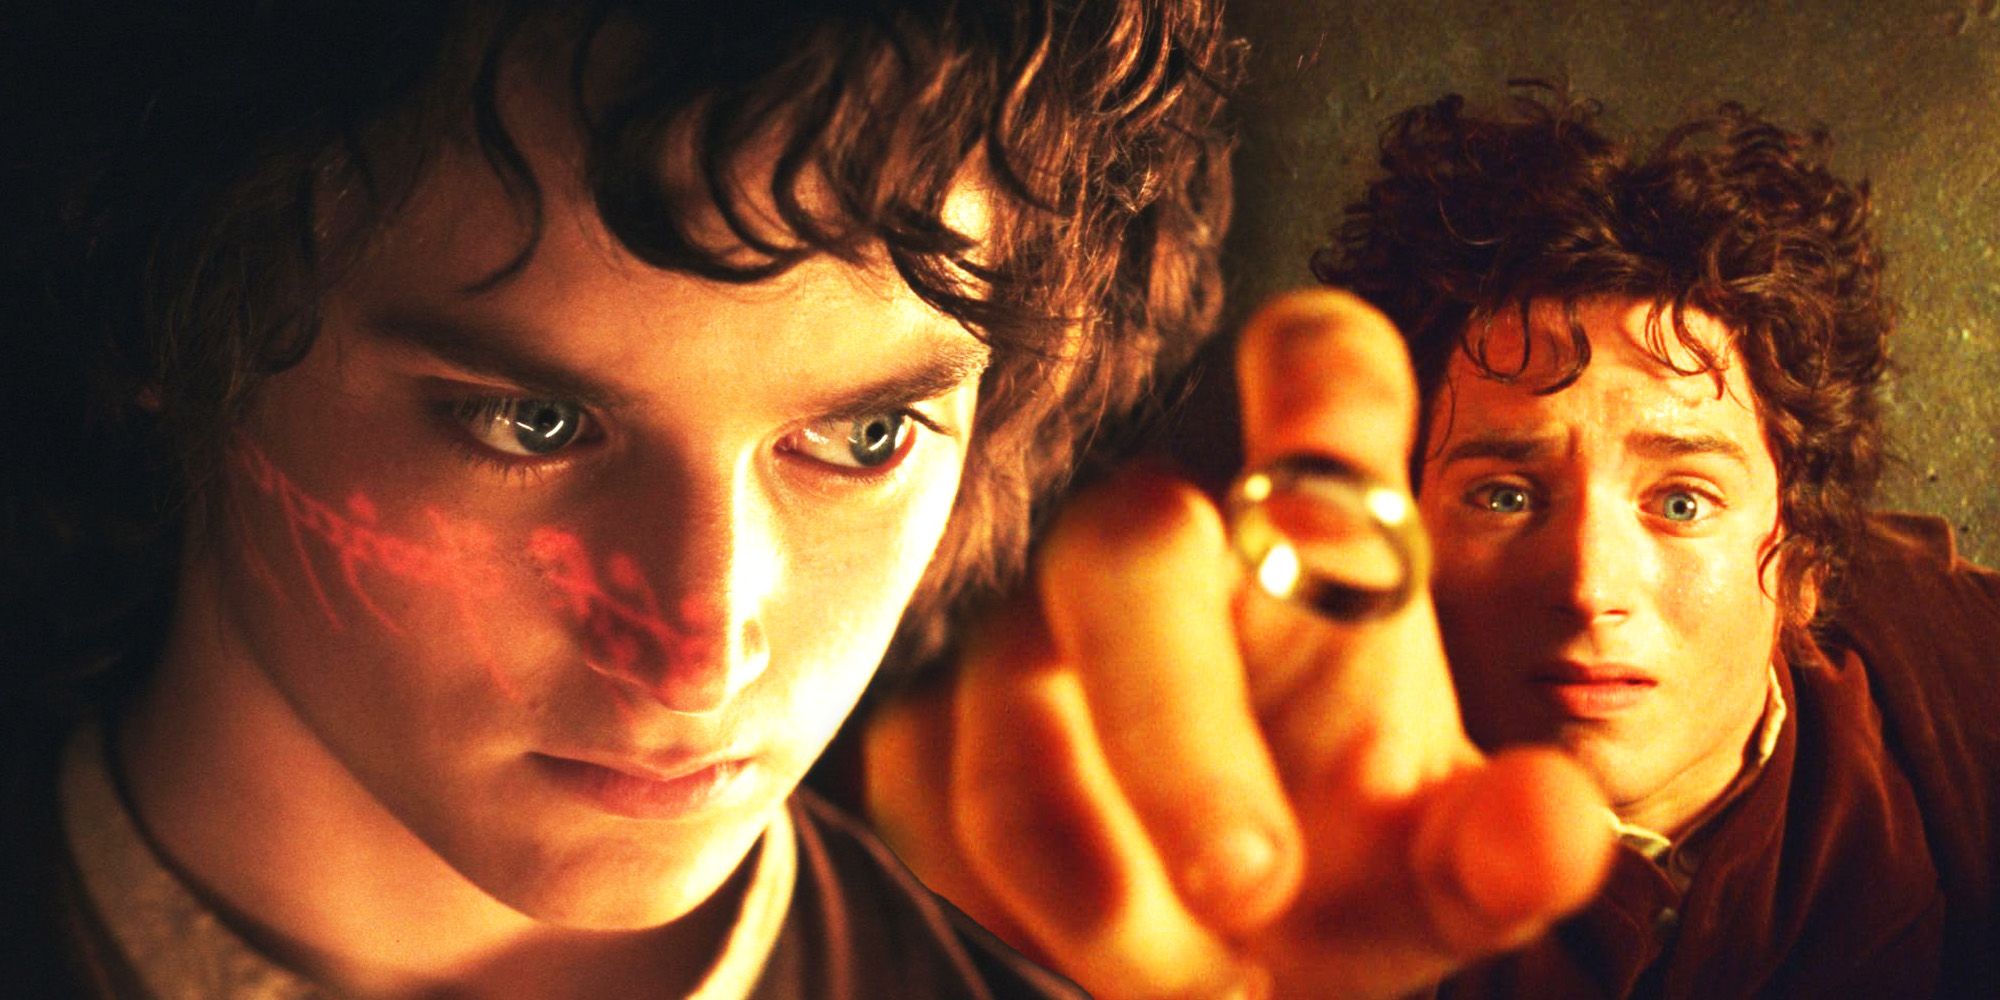 Elijah Wood as Frodo in The Lord of the Rings